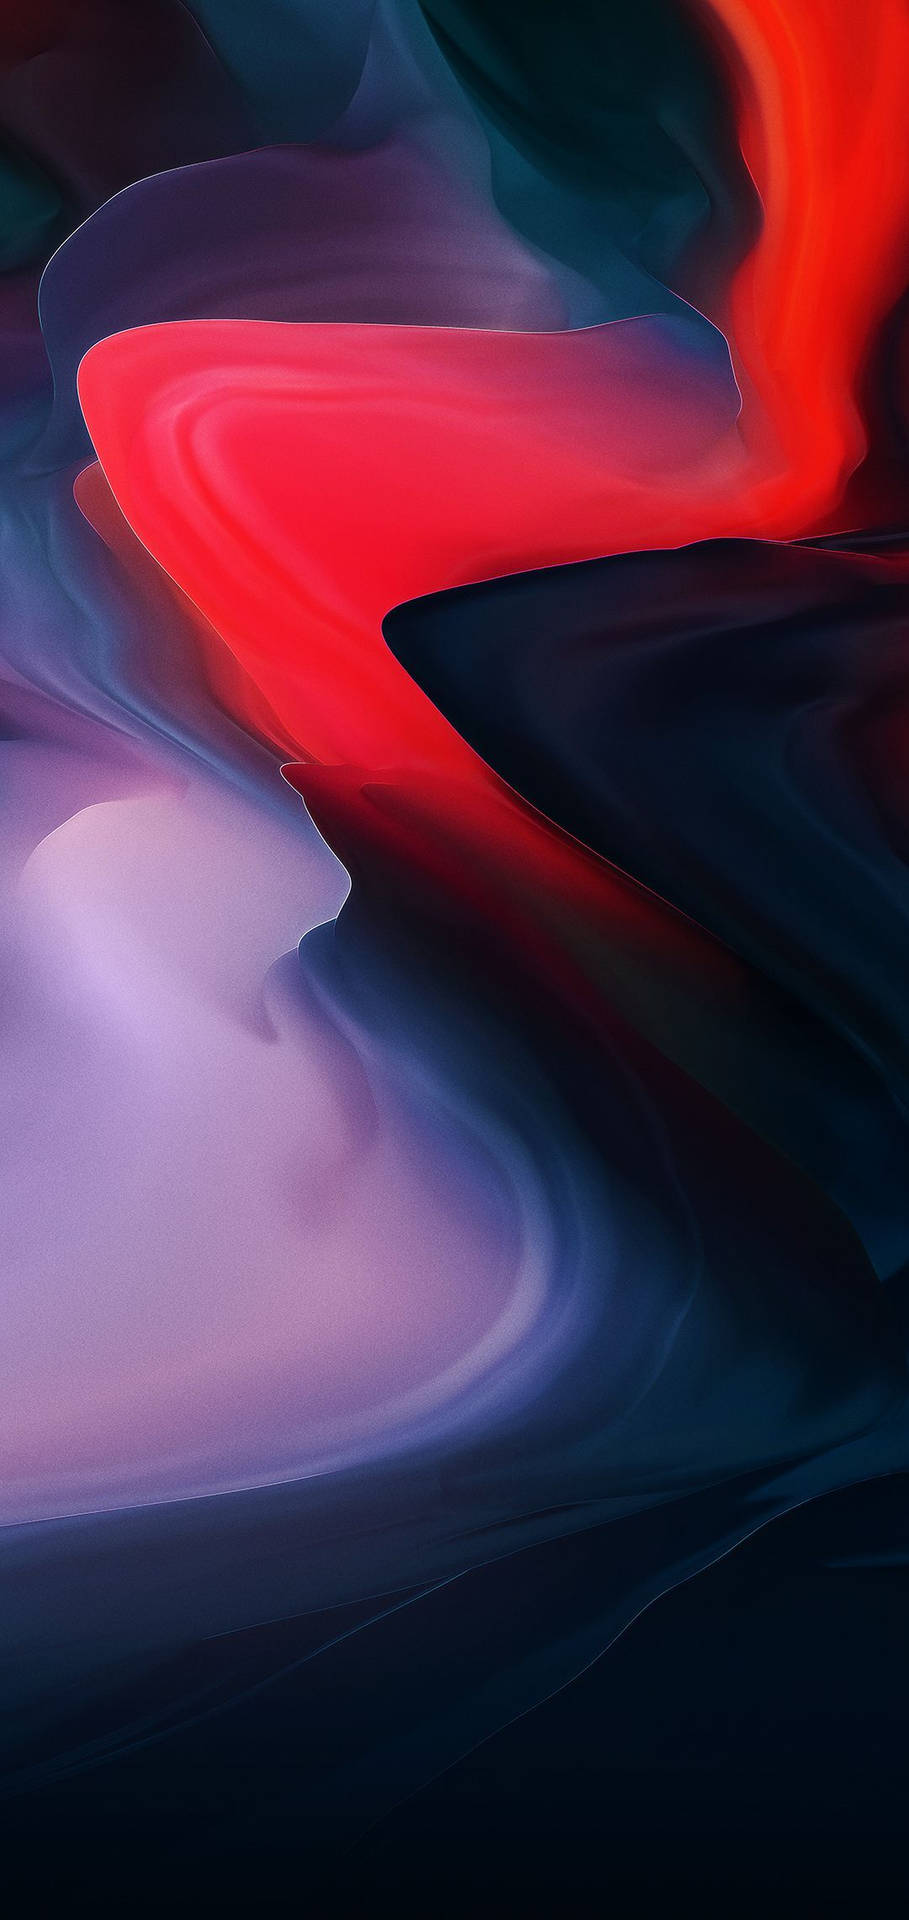 Sophisticated OnePlus 9R With Unique Dark Abstract Design Wallpaper